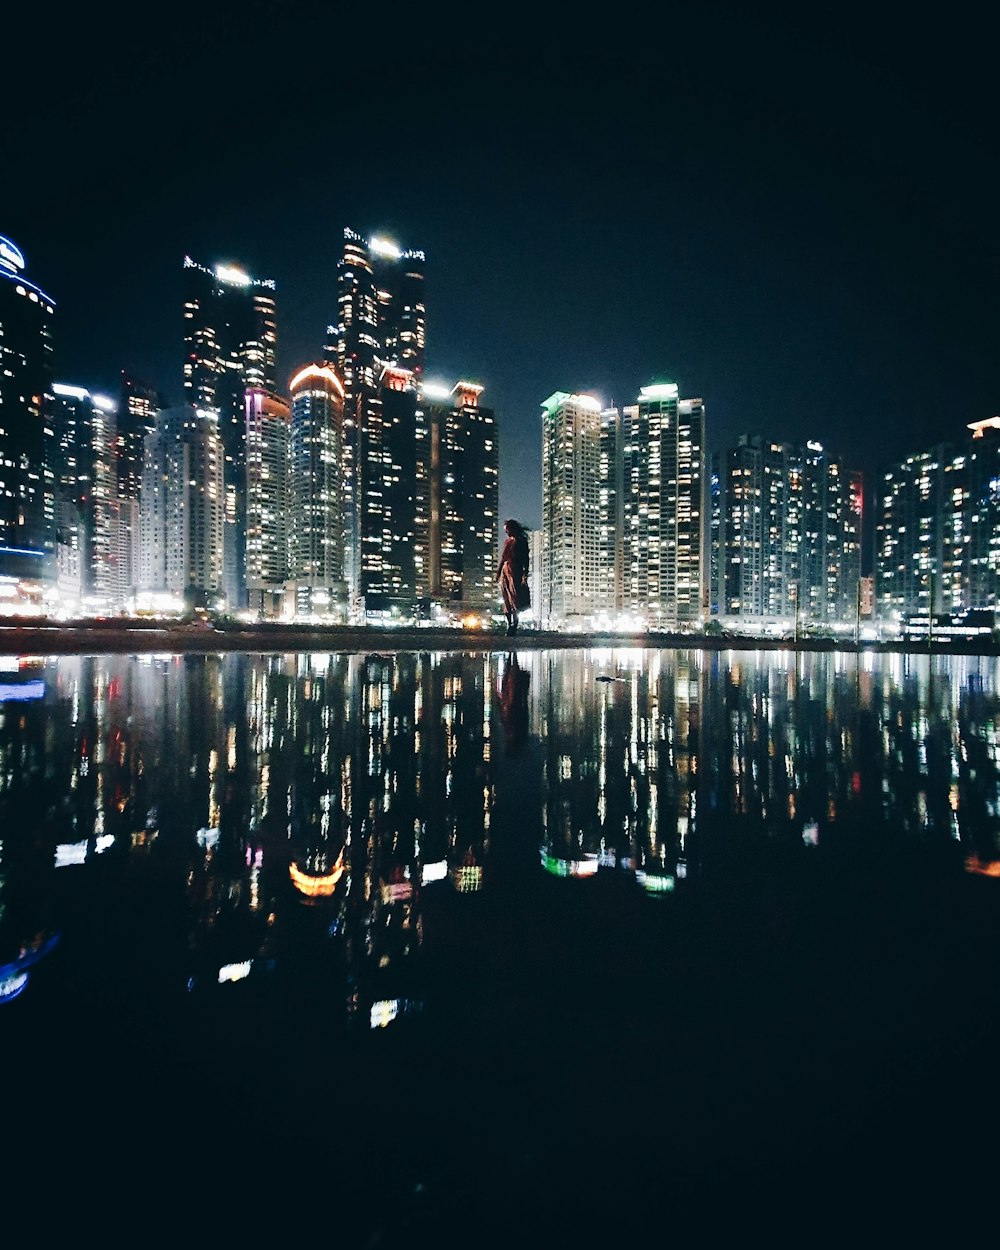 reflection of high-rise buildings on body of water during nighttime